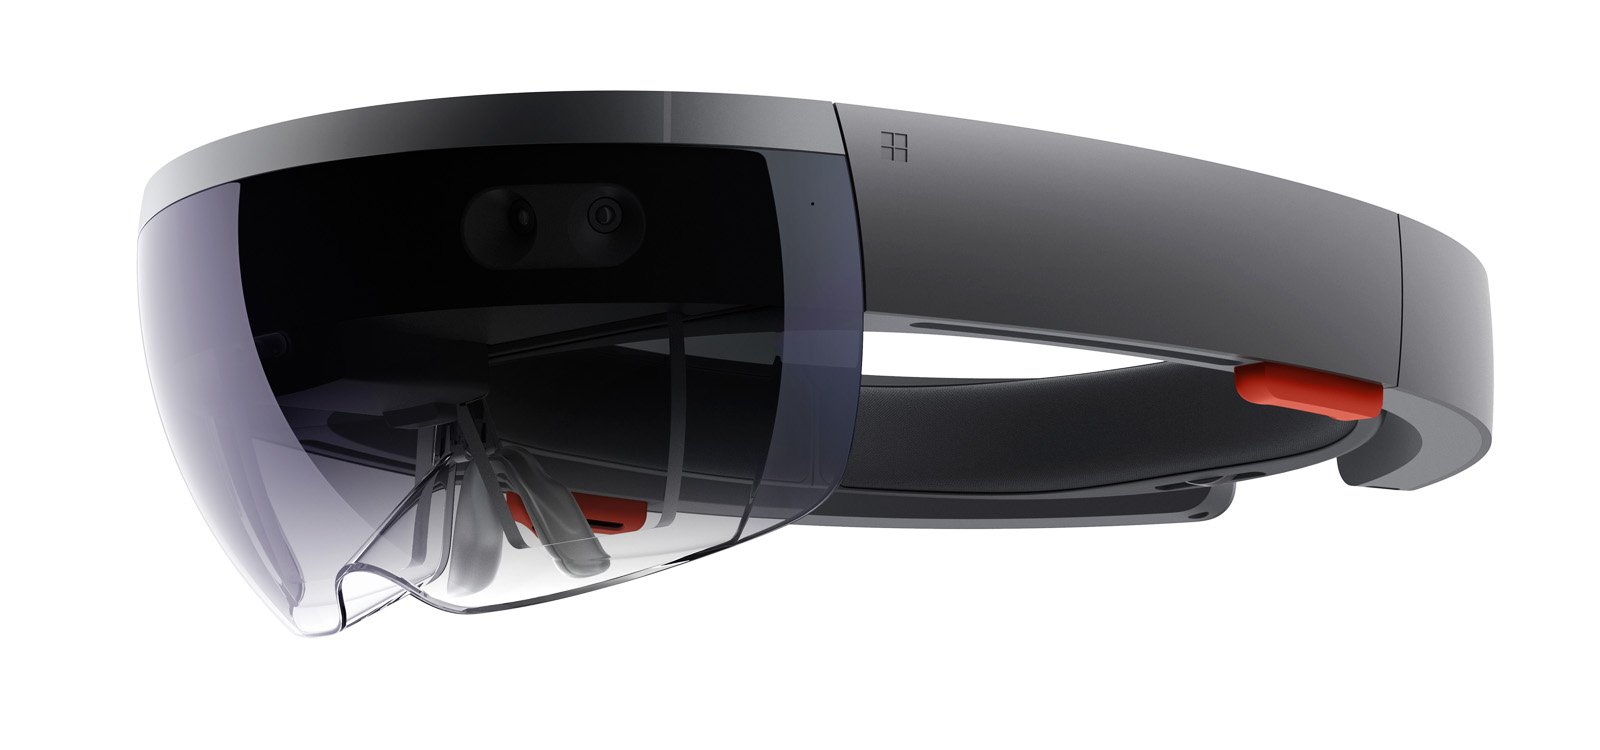 <p>Microsoft has launched mixed-reality headset HoloLens.</p>
